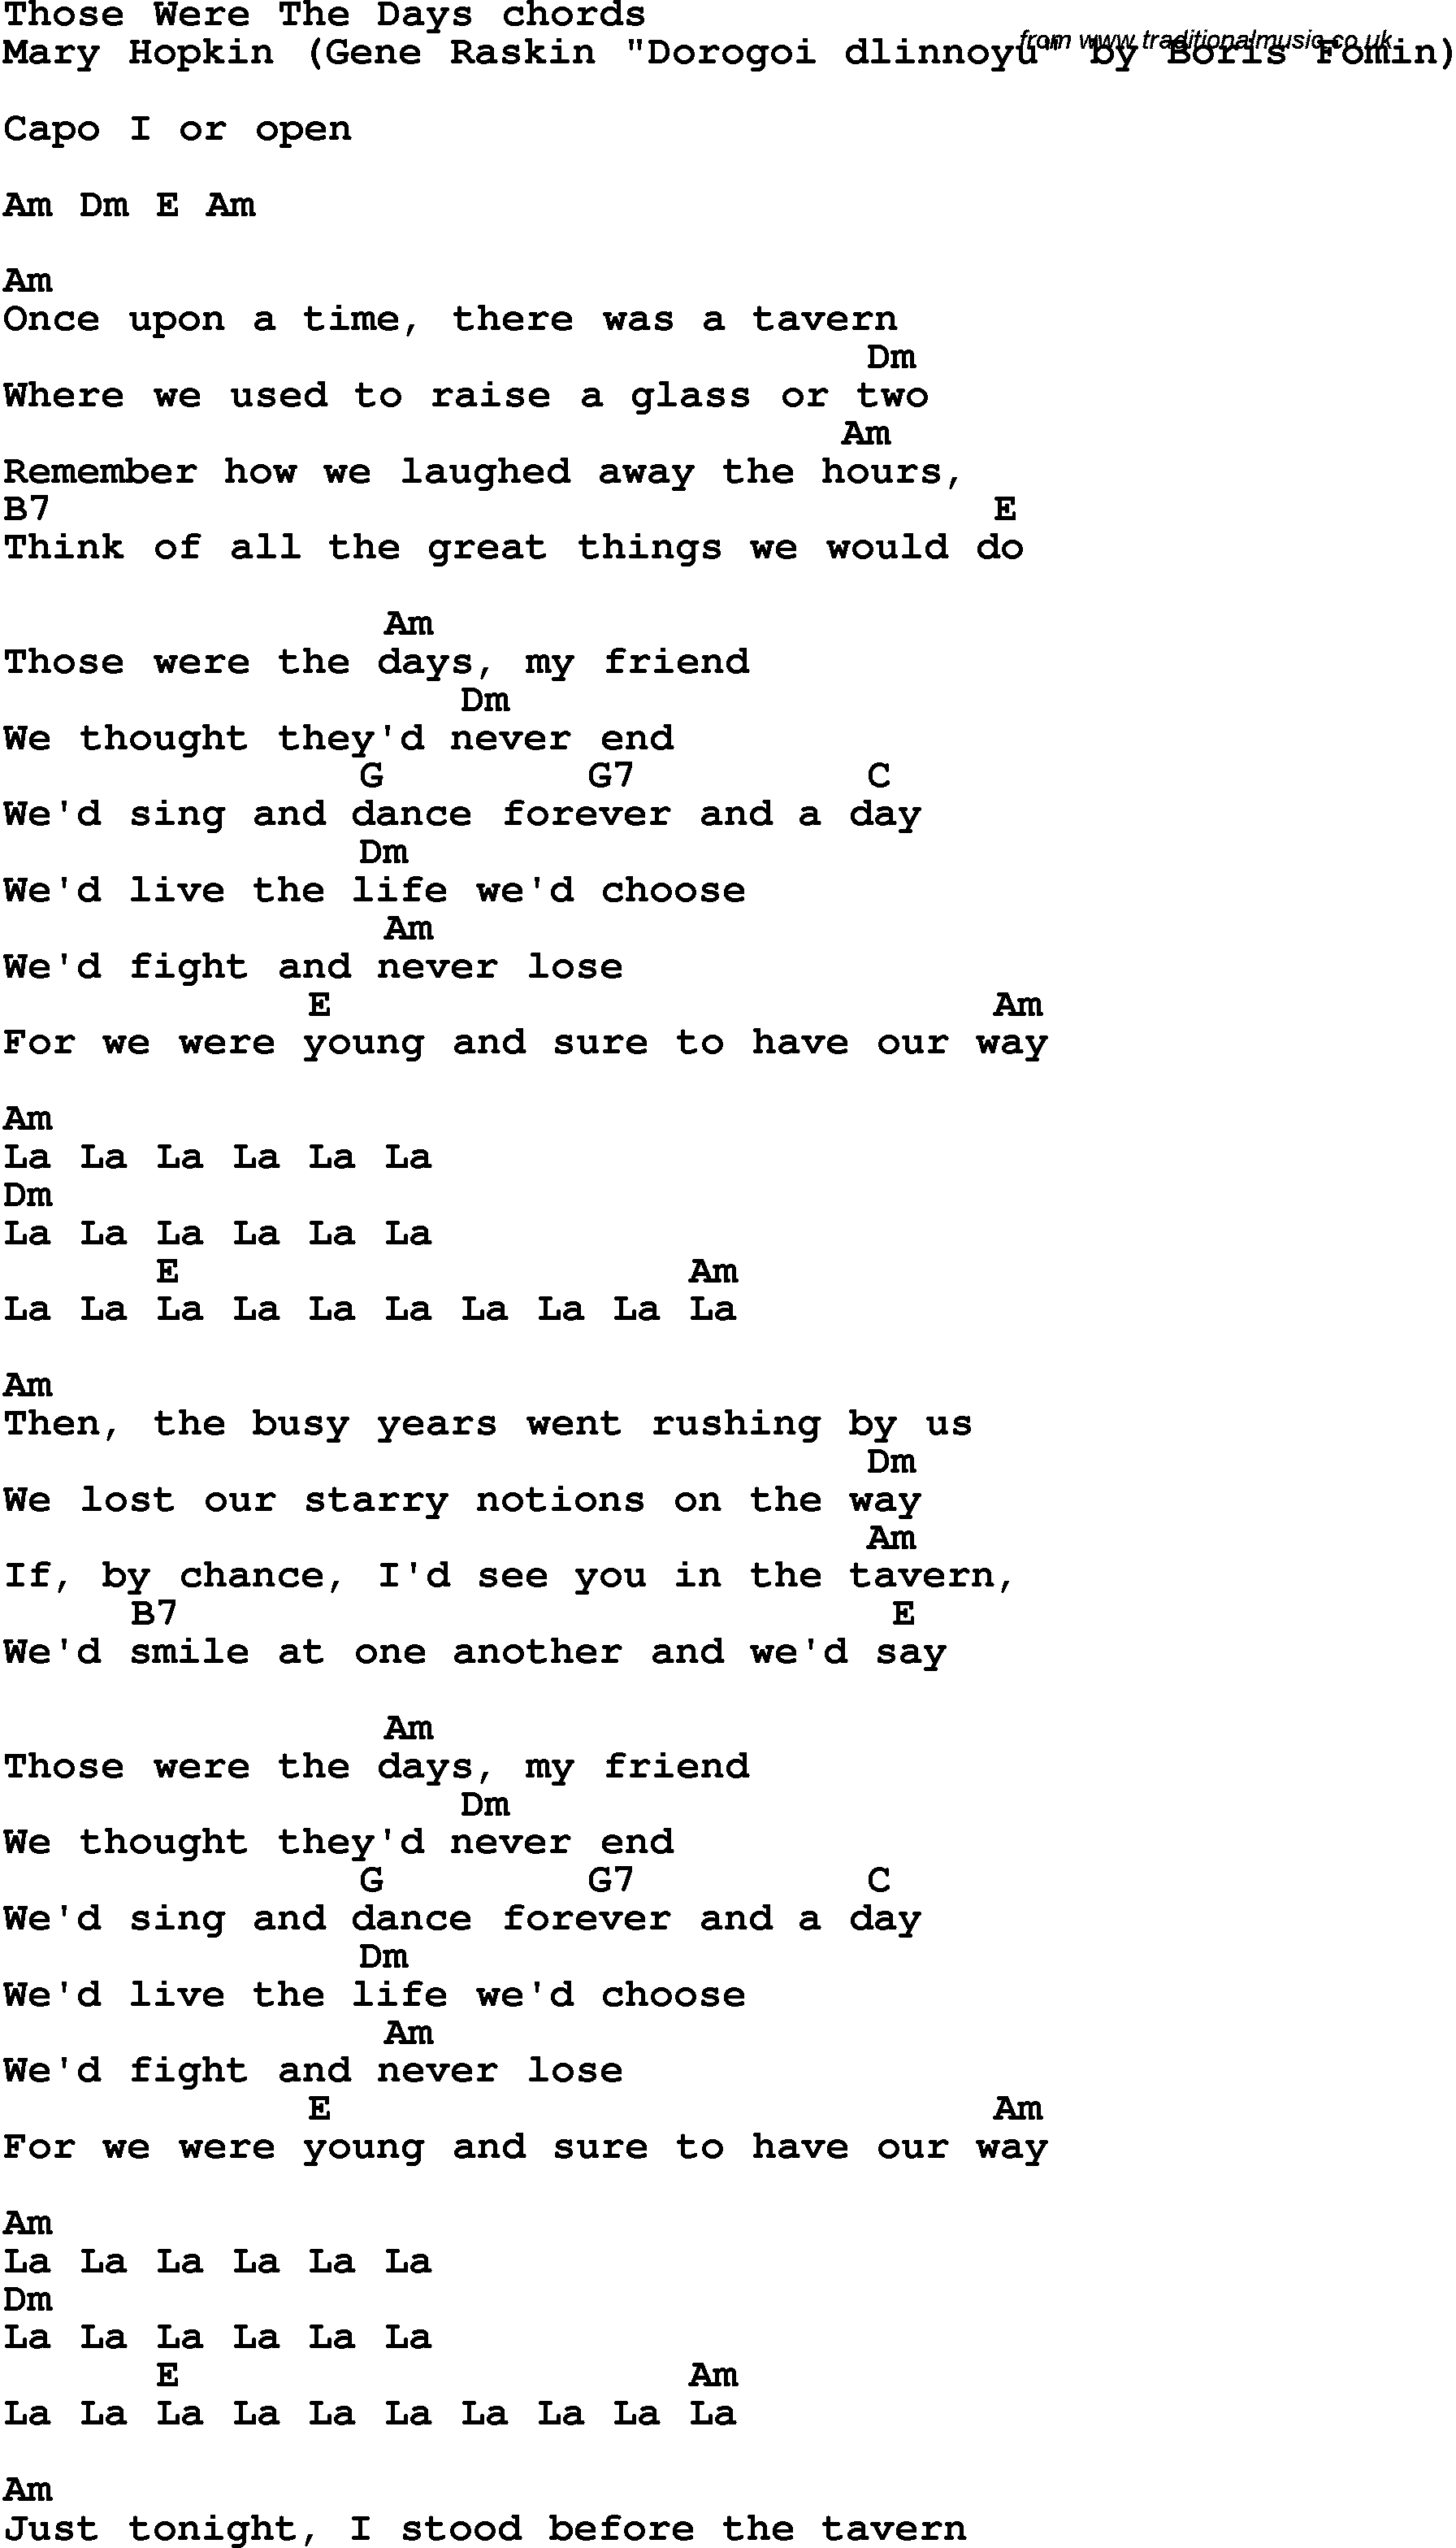 Song Lyrics with guitar chords for Those Were The Days - Mary Hopkin